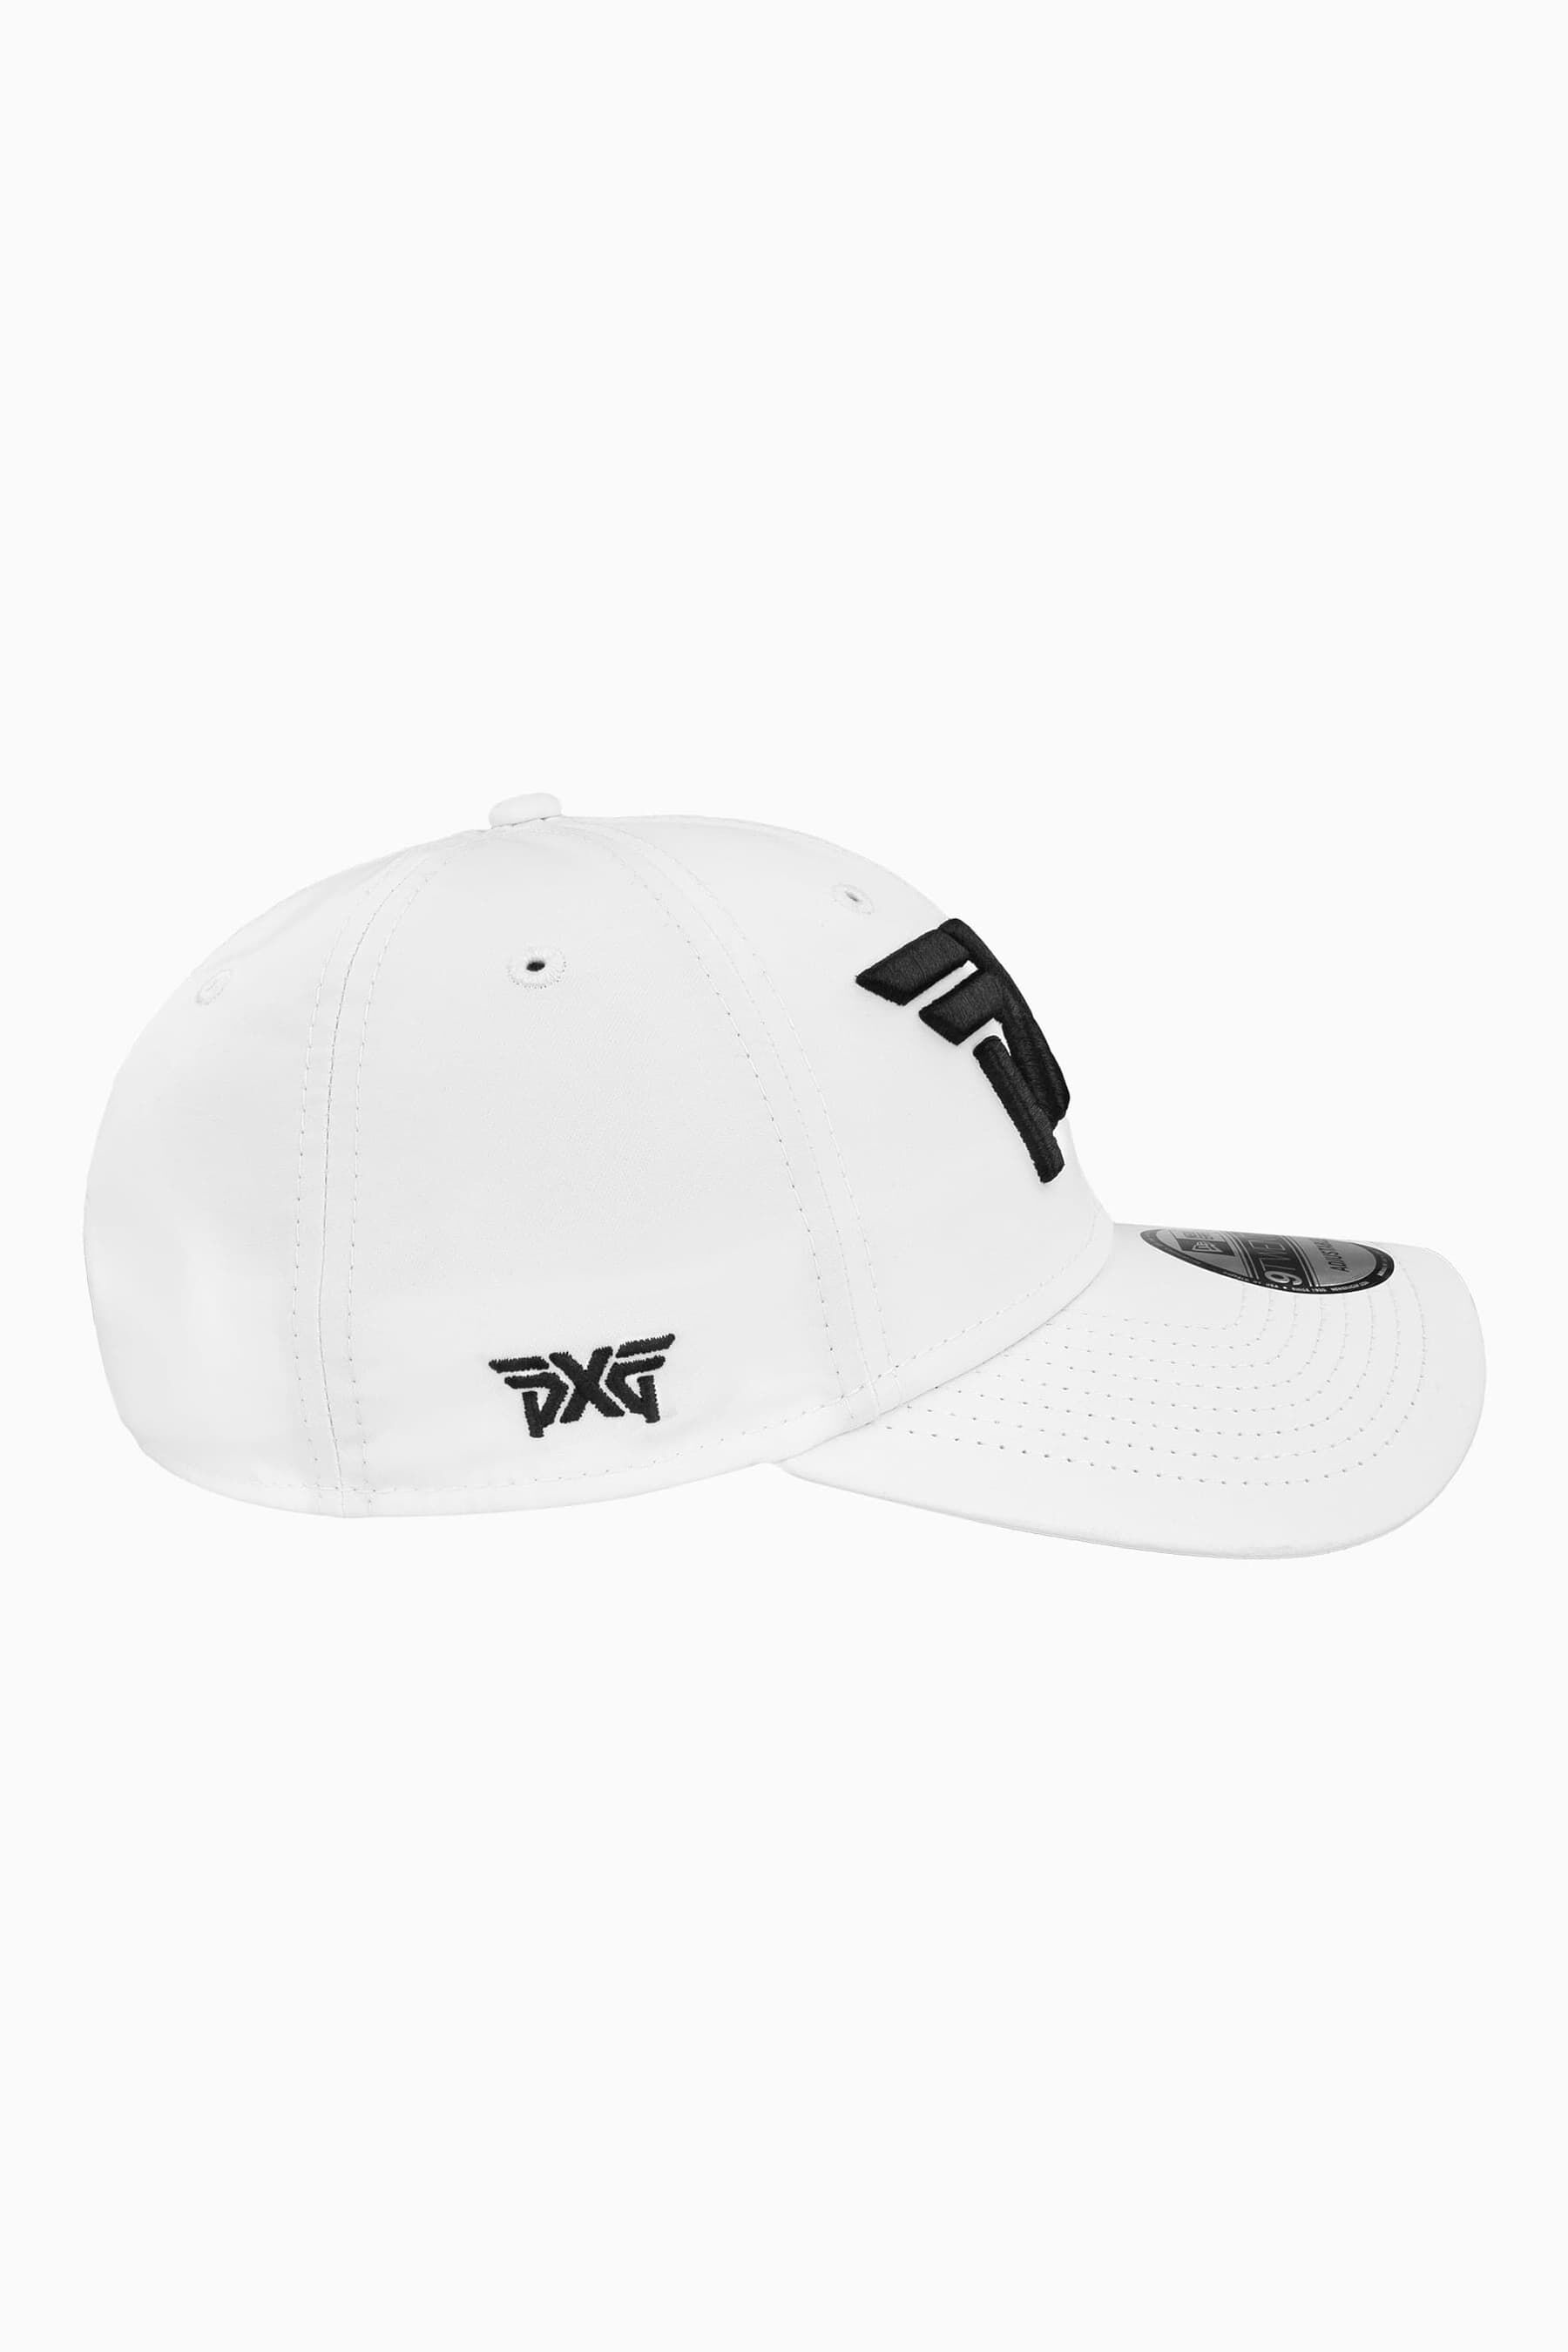 discount 86% WOMEN FASHION Accessories Hat and cap Black Black Single YMCMB hat and cap 